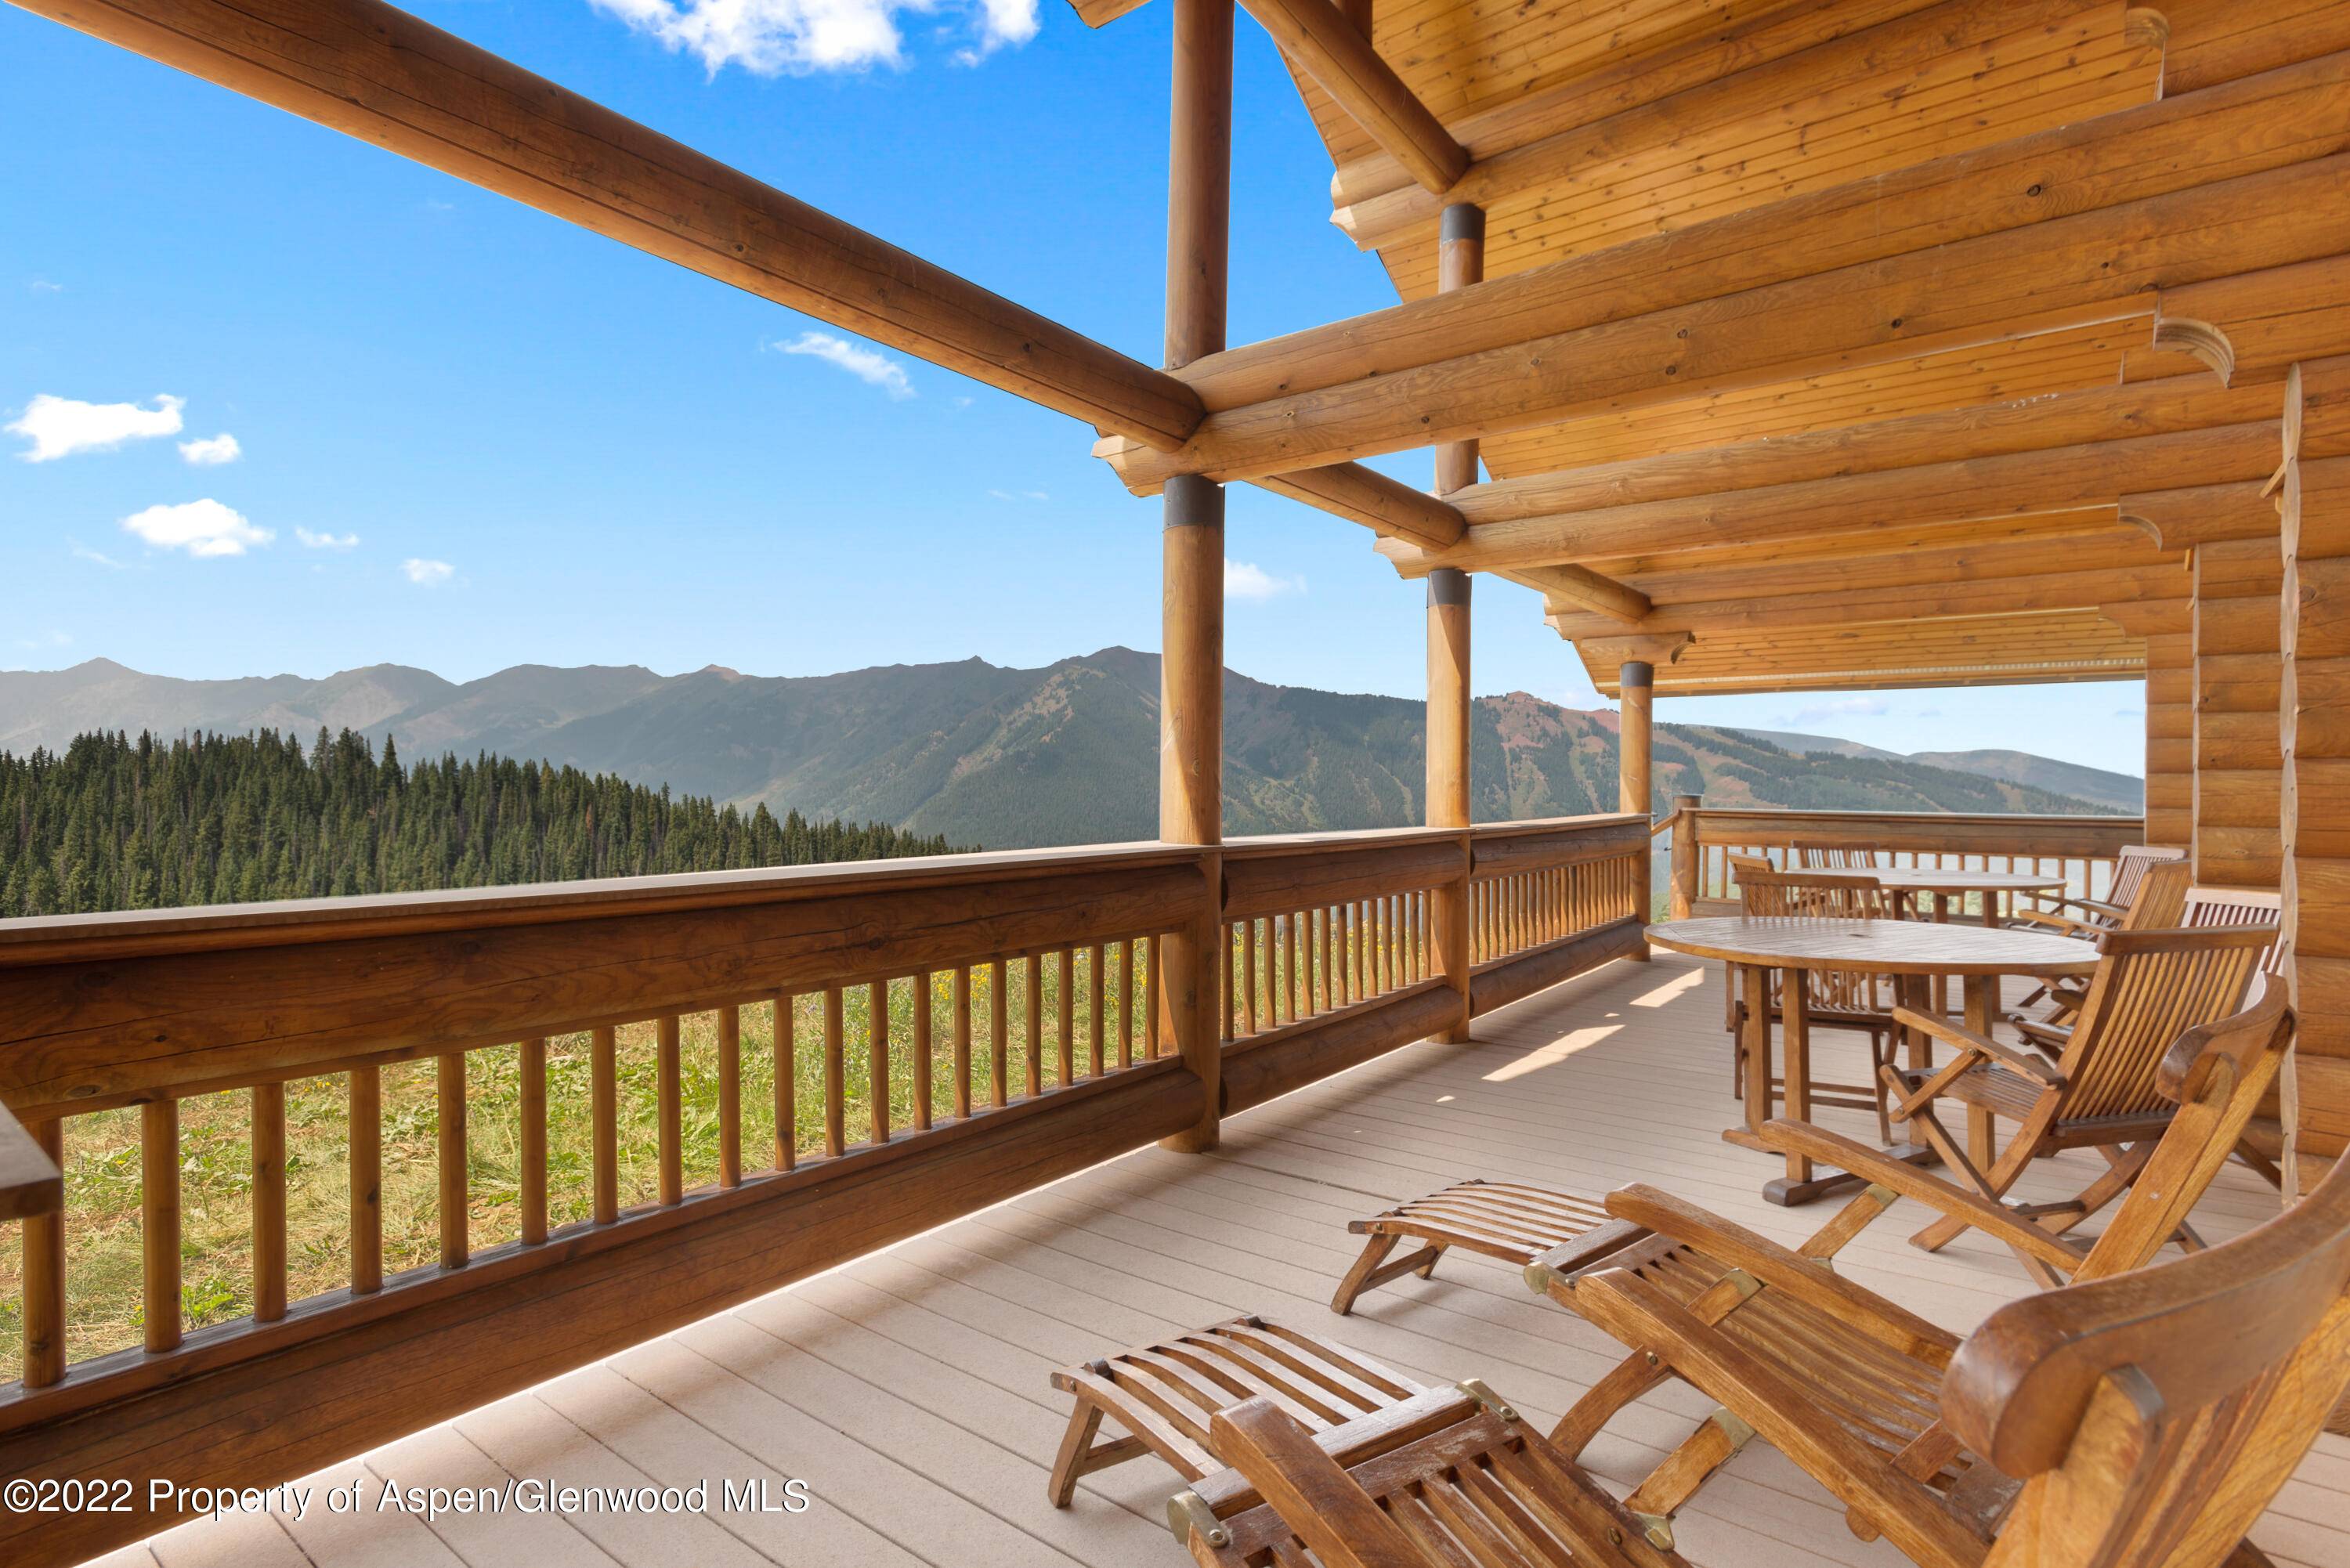 Experience an authentic and luxurious Aspen retreat at the ''Ridge Cabin'' situated on 71 acres in Colorado's backcountry.